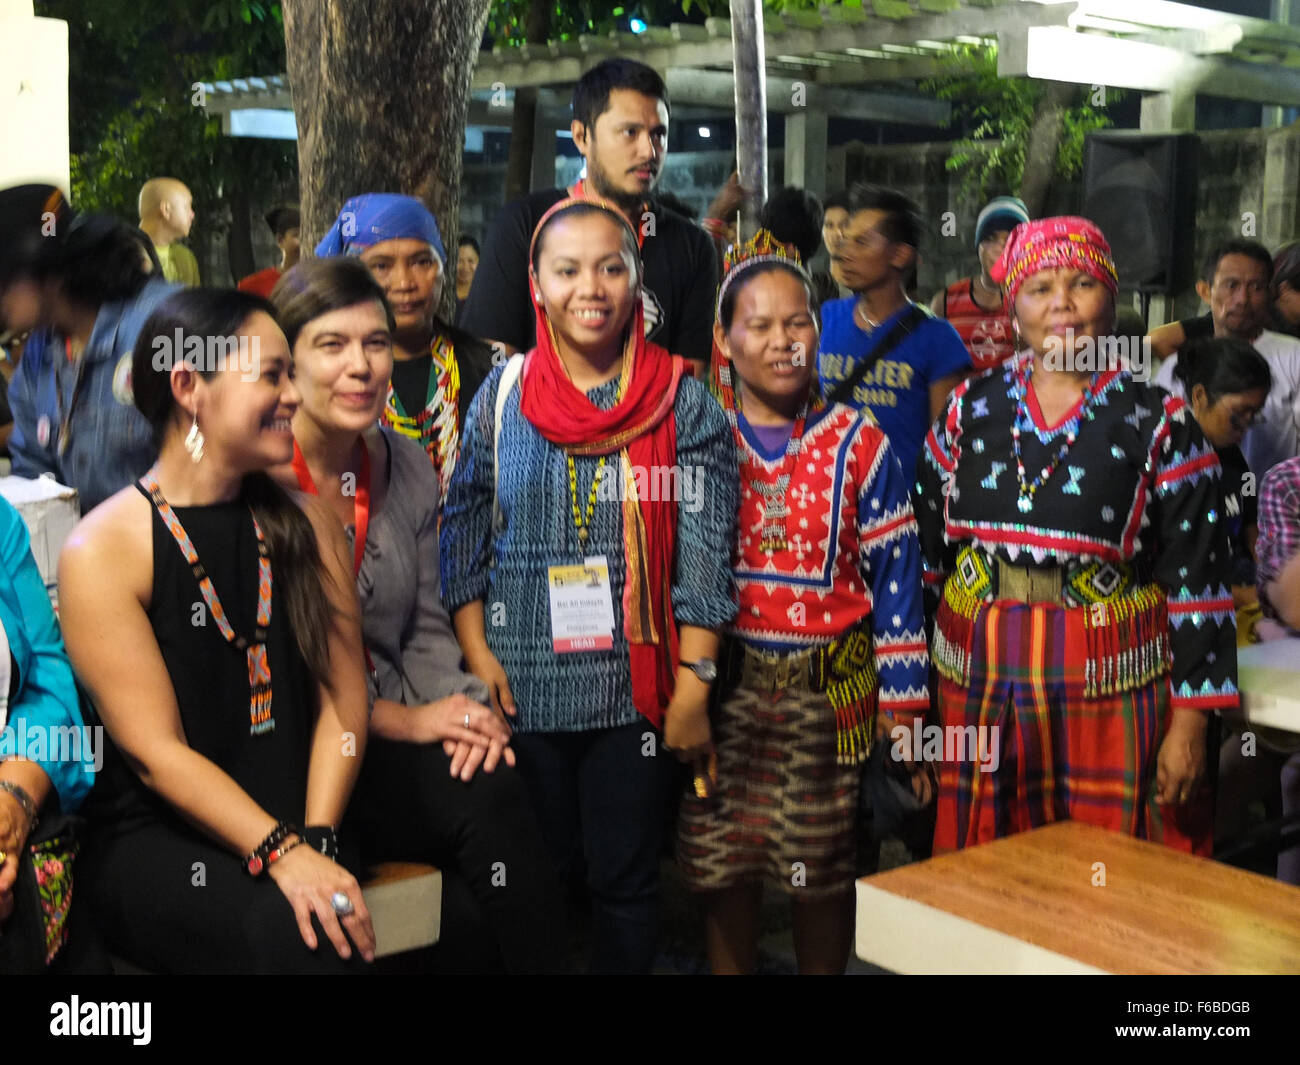 Stage Actress, Monique Wilson with foreign posed for a picture with Lumad women at the Kampuhan sa Baclaran headquarters. The Lumad peoples are a group of indigenous people of the southern Philippines. It is a Cebuano term meaning 'native' or 'indigenous'. The term is short for Katawhang Lumad (literally 'indigenous peoples'), the autonym officially adopted by the delegates of the Lumad Mindanao Peoples Federation (LMPF) founding assembly on 26 June 1986 at the Guadalupe Formation Center, Balindog, Kidapawan, Cotabato, Philippines. It is the self-ascription and collective identity of the indig Stock Photo